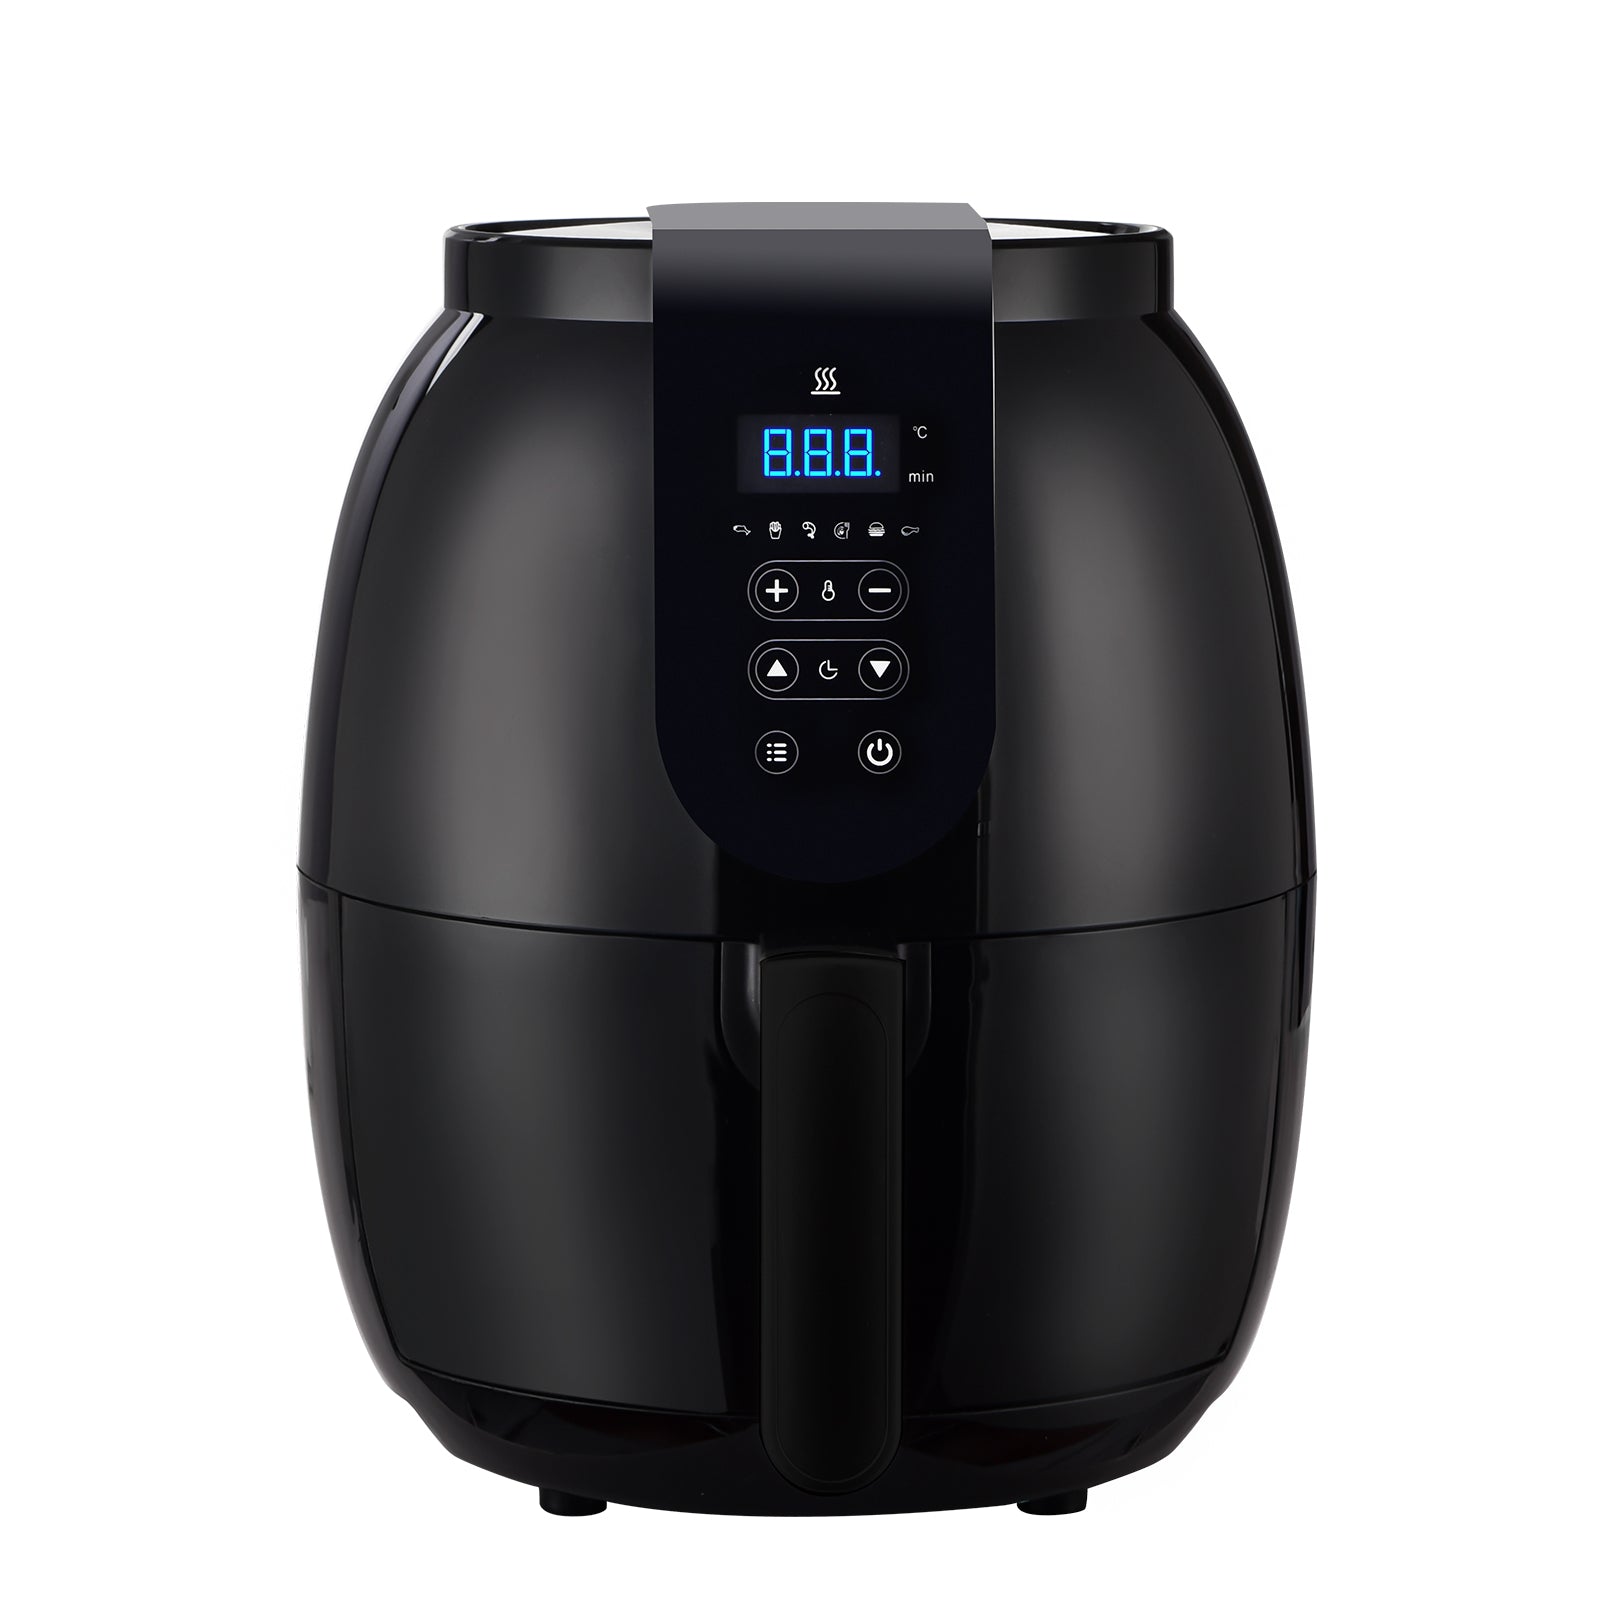 Kitchen Couture 3.5 Litre Digital Display Black Air Fryer Oil Free Cooking - SILBERSHELL